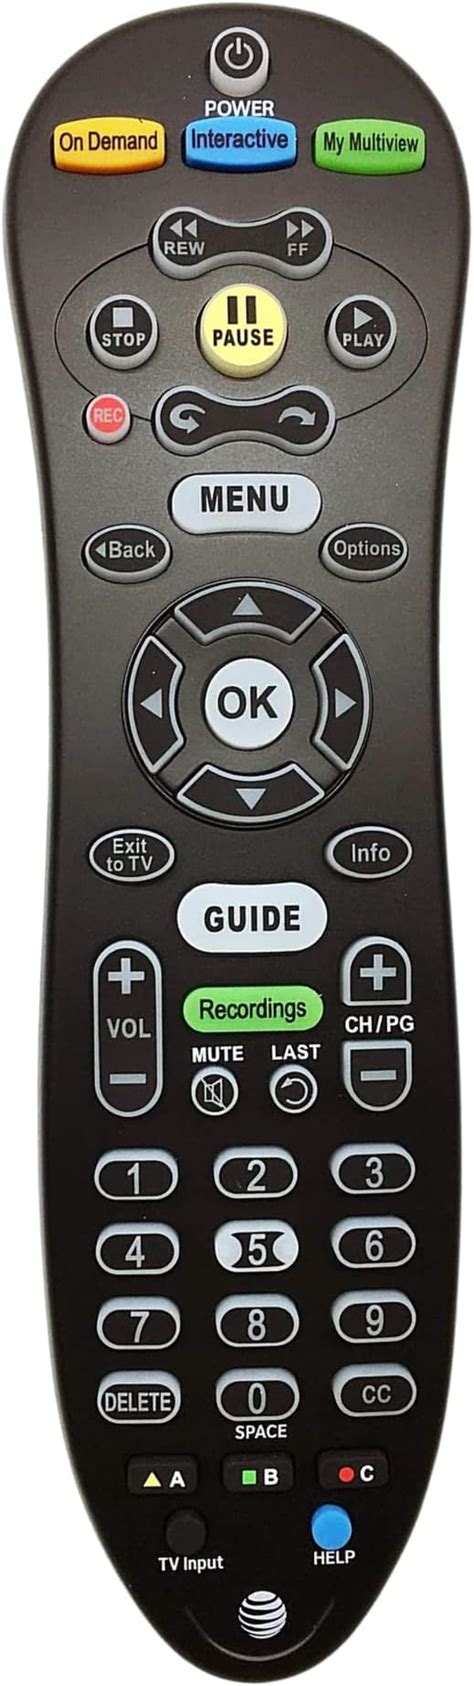 Jan 12, 2022 · AT&T S30 U-Verse Uverse Standard TV Multi-Functional Programmable IR Universal Remote Control Program remote by Popular TV Brands: 1. Find your TV Brand in the chart below and its corresponding number.(Find the brand list table from product images) 2. . 